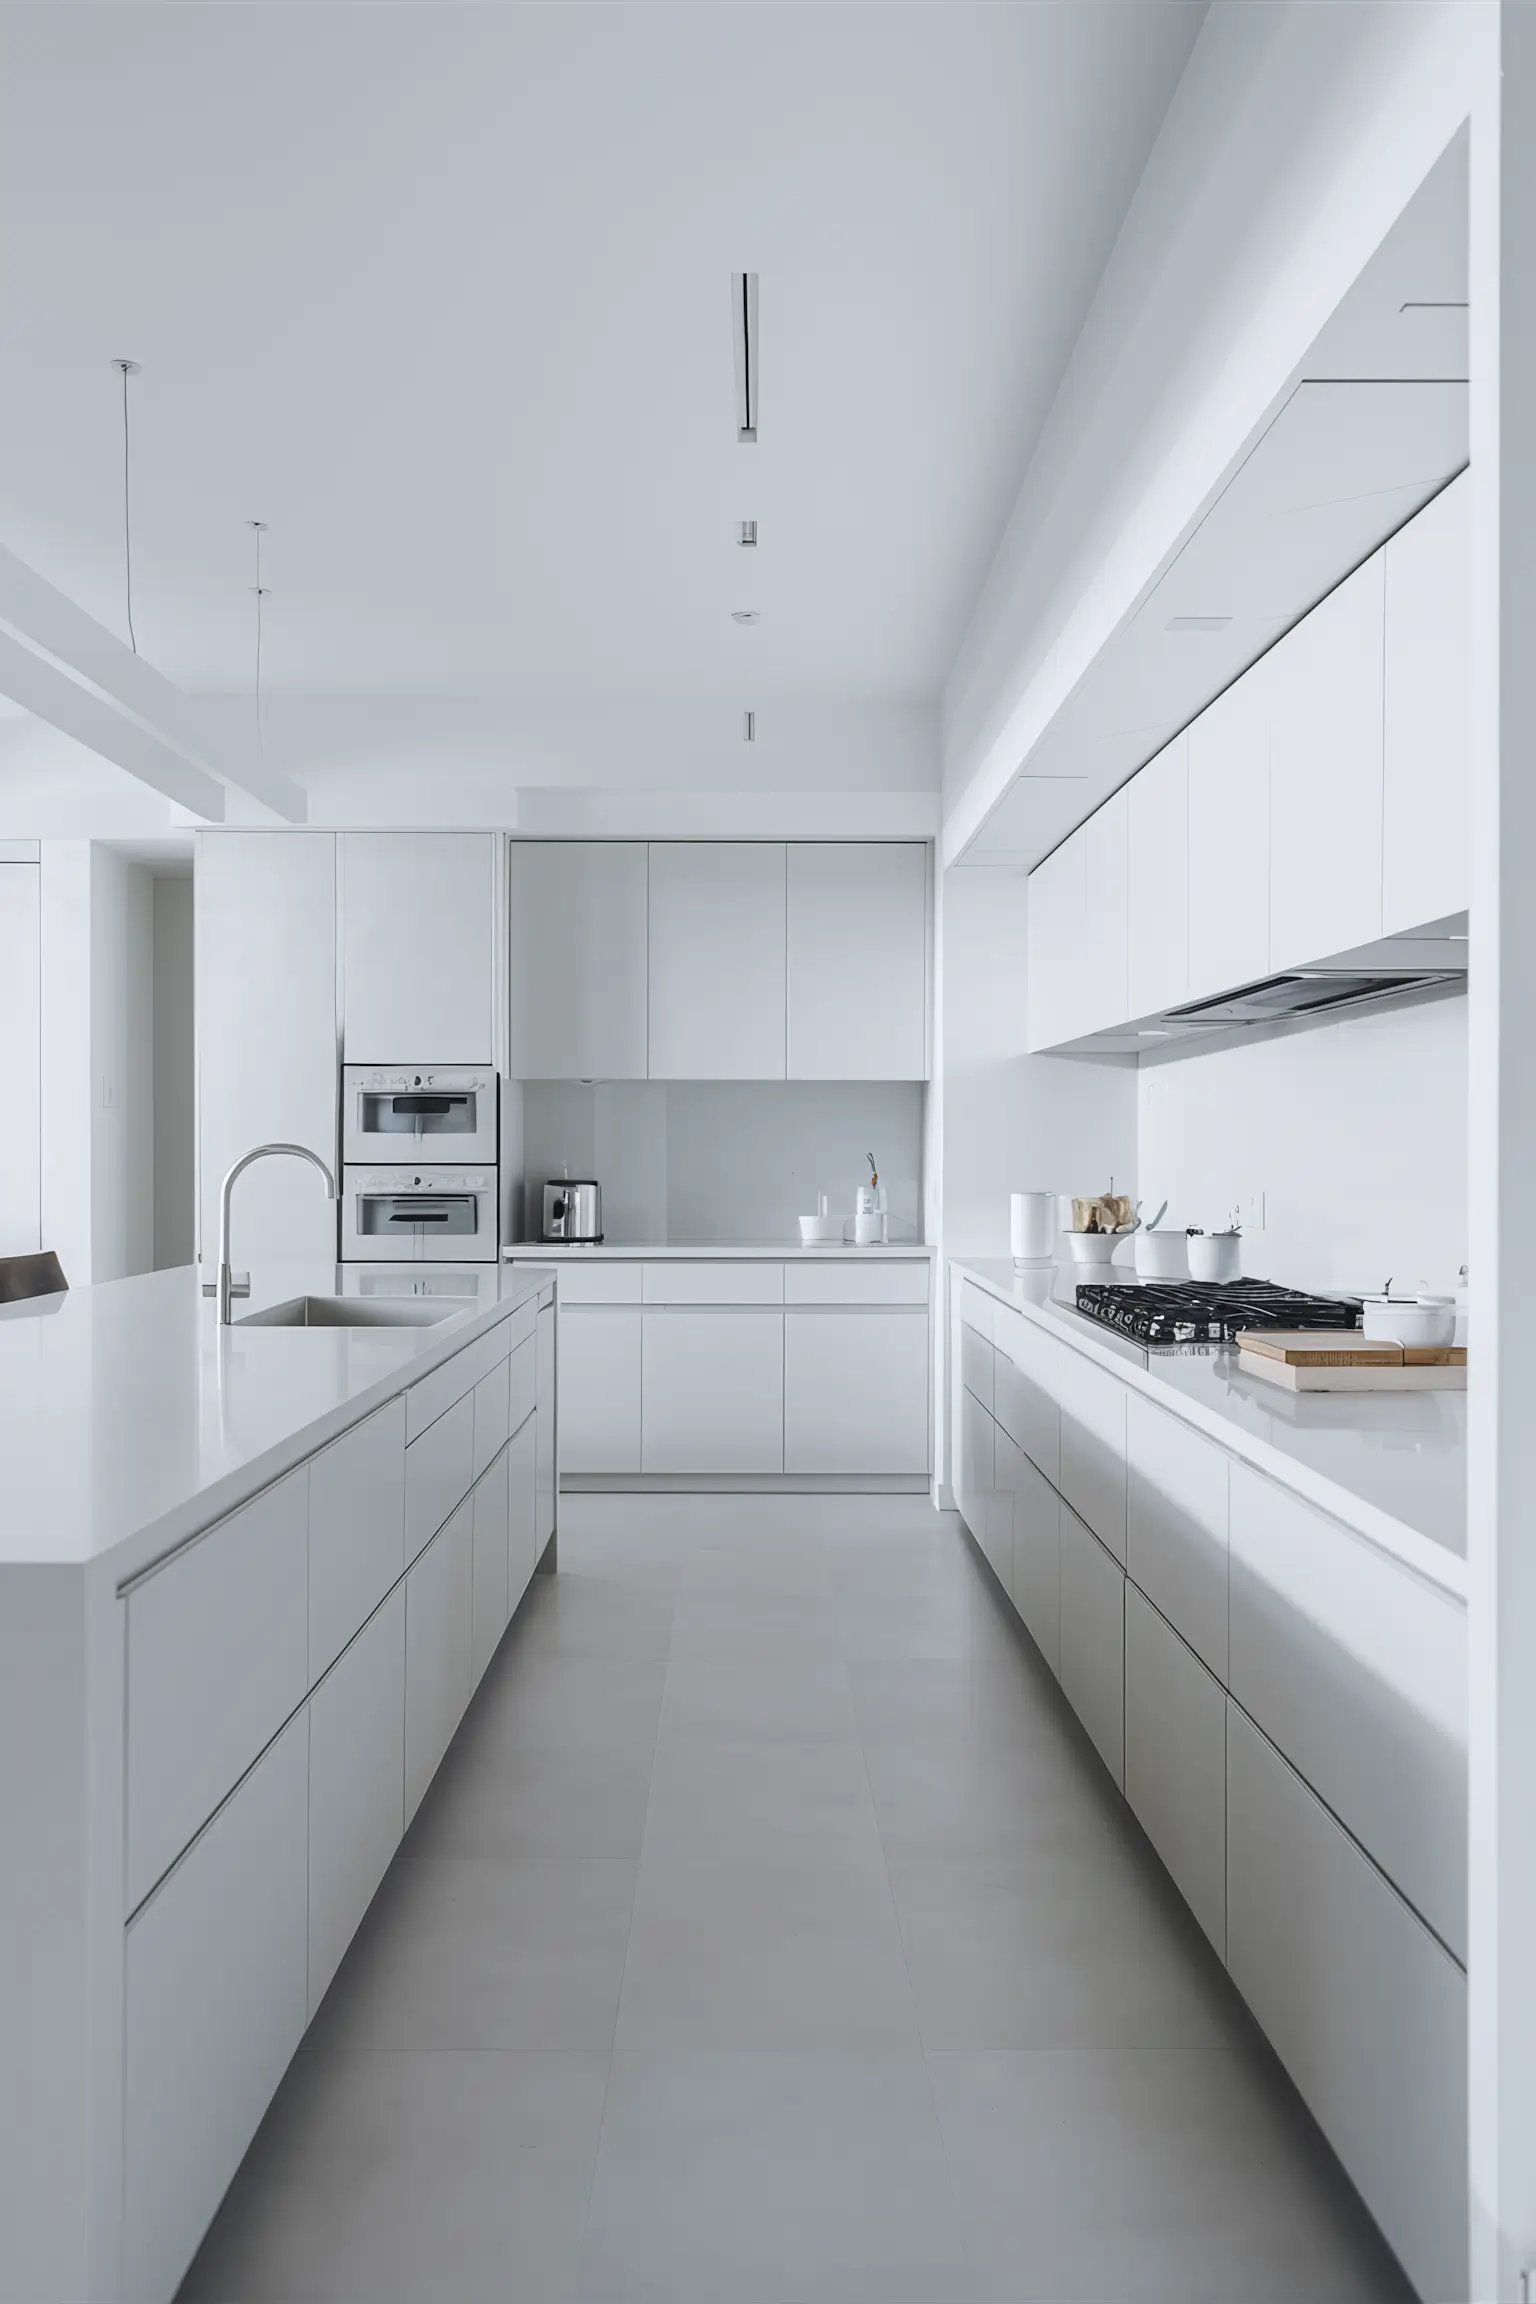 Minimalistic white kitchen with clean lines and uncluttered surfaces.